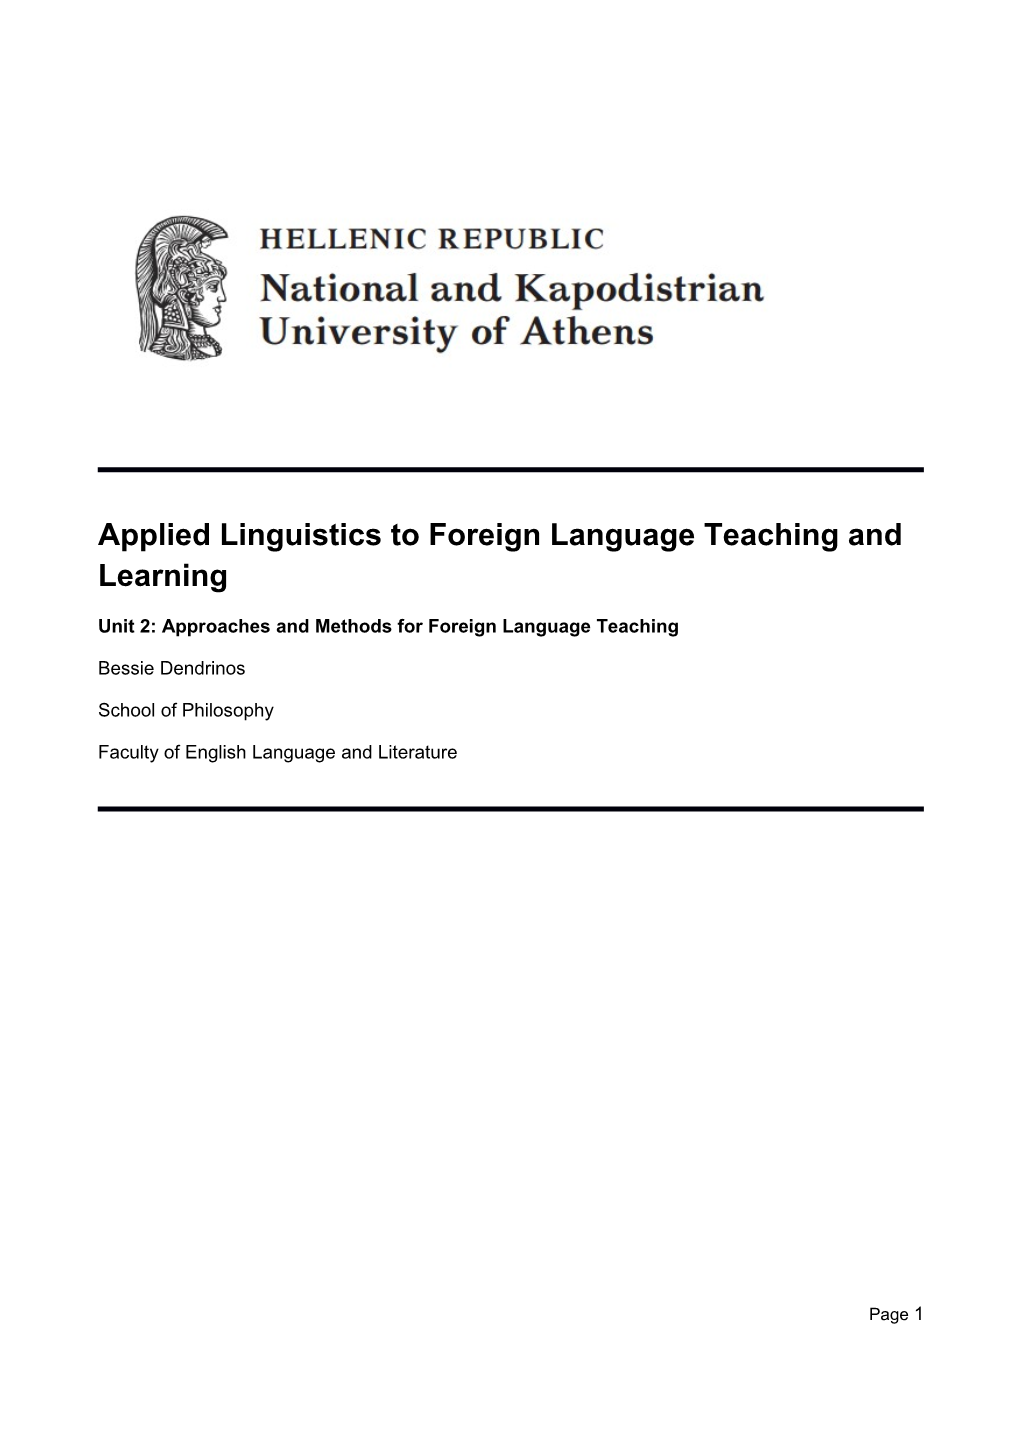 Approaches and Methods for Foreign Language Teaching